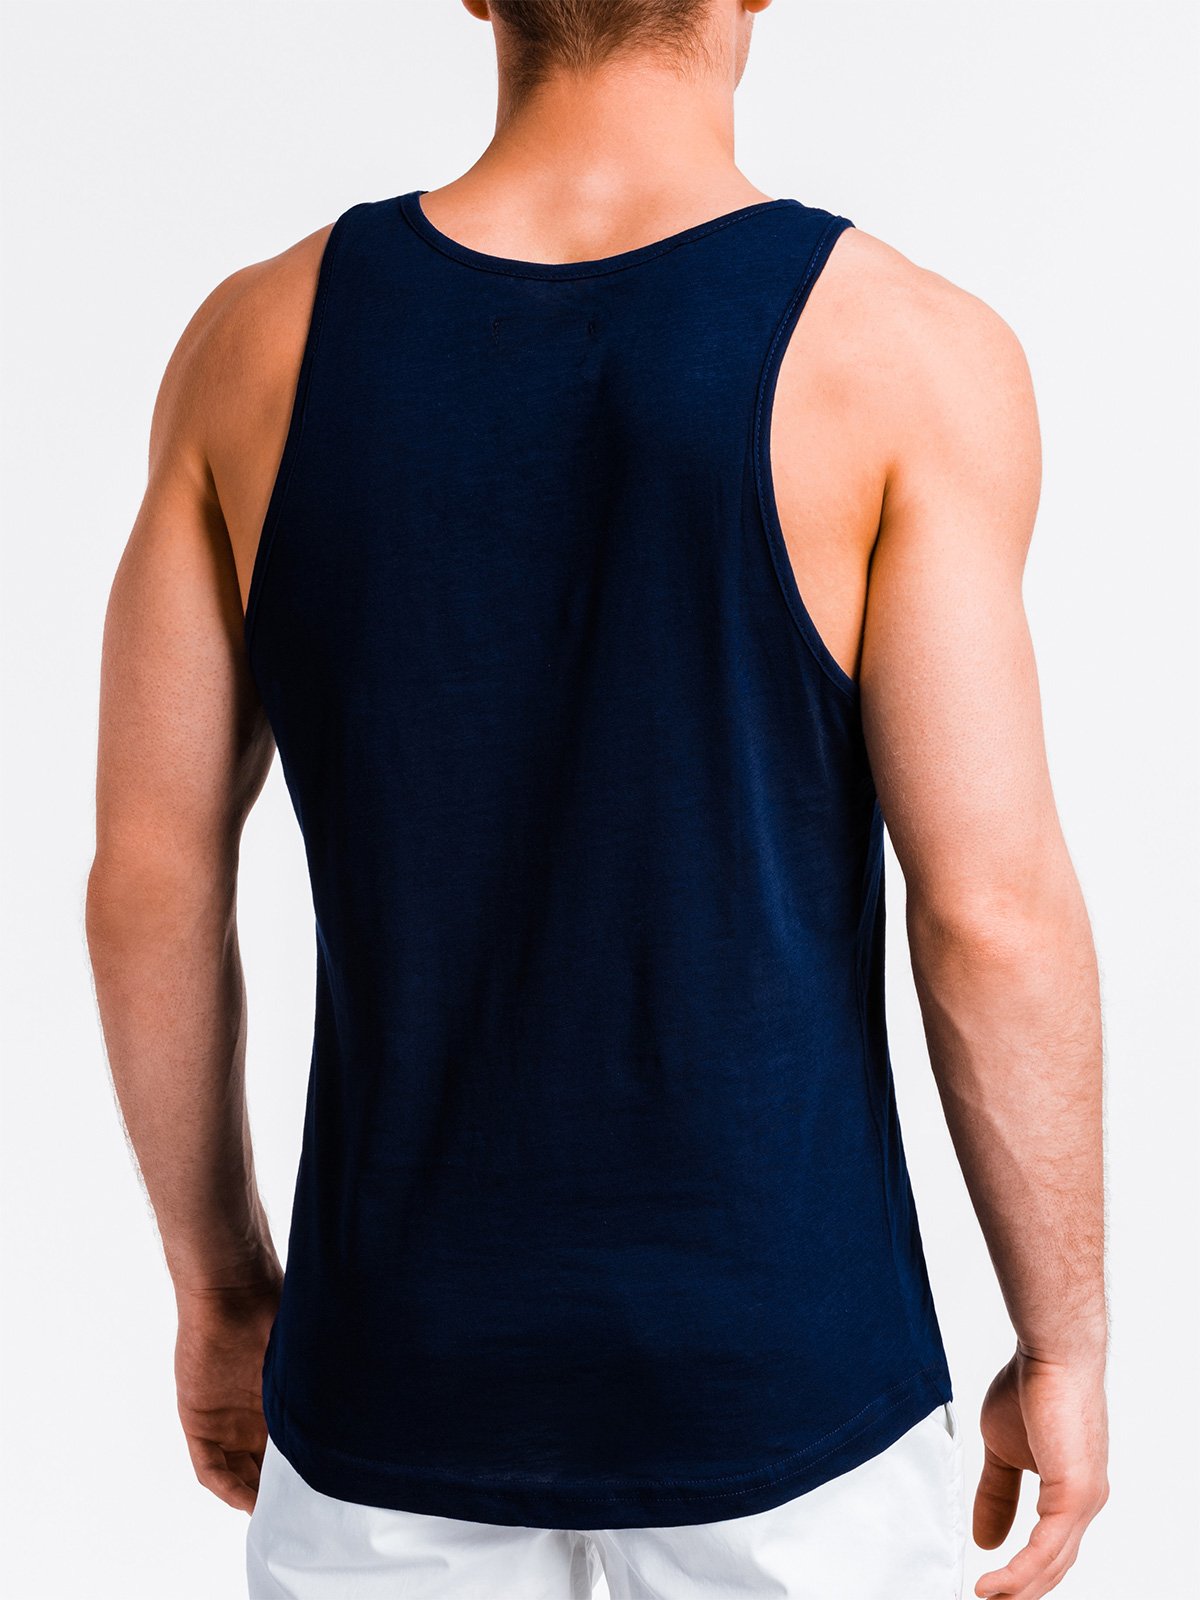 Men's printed tank top S827 - navy | MODONE wholesale - Clothing For Men